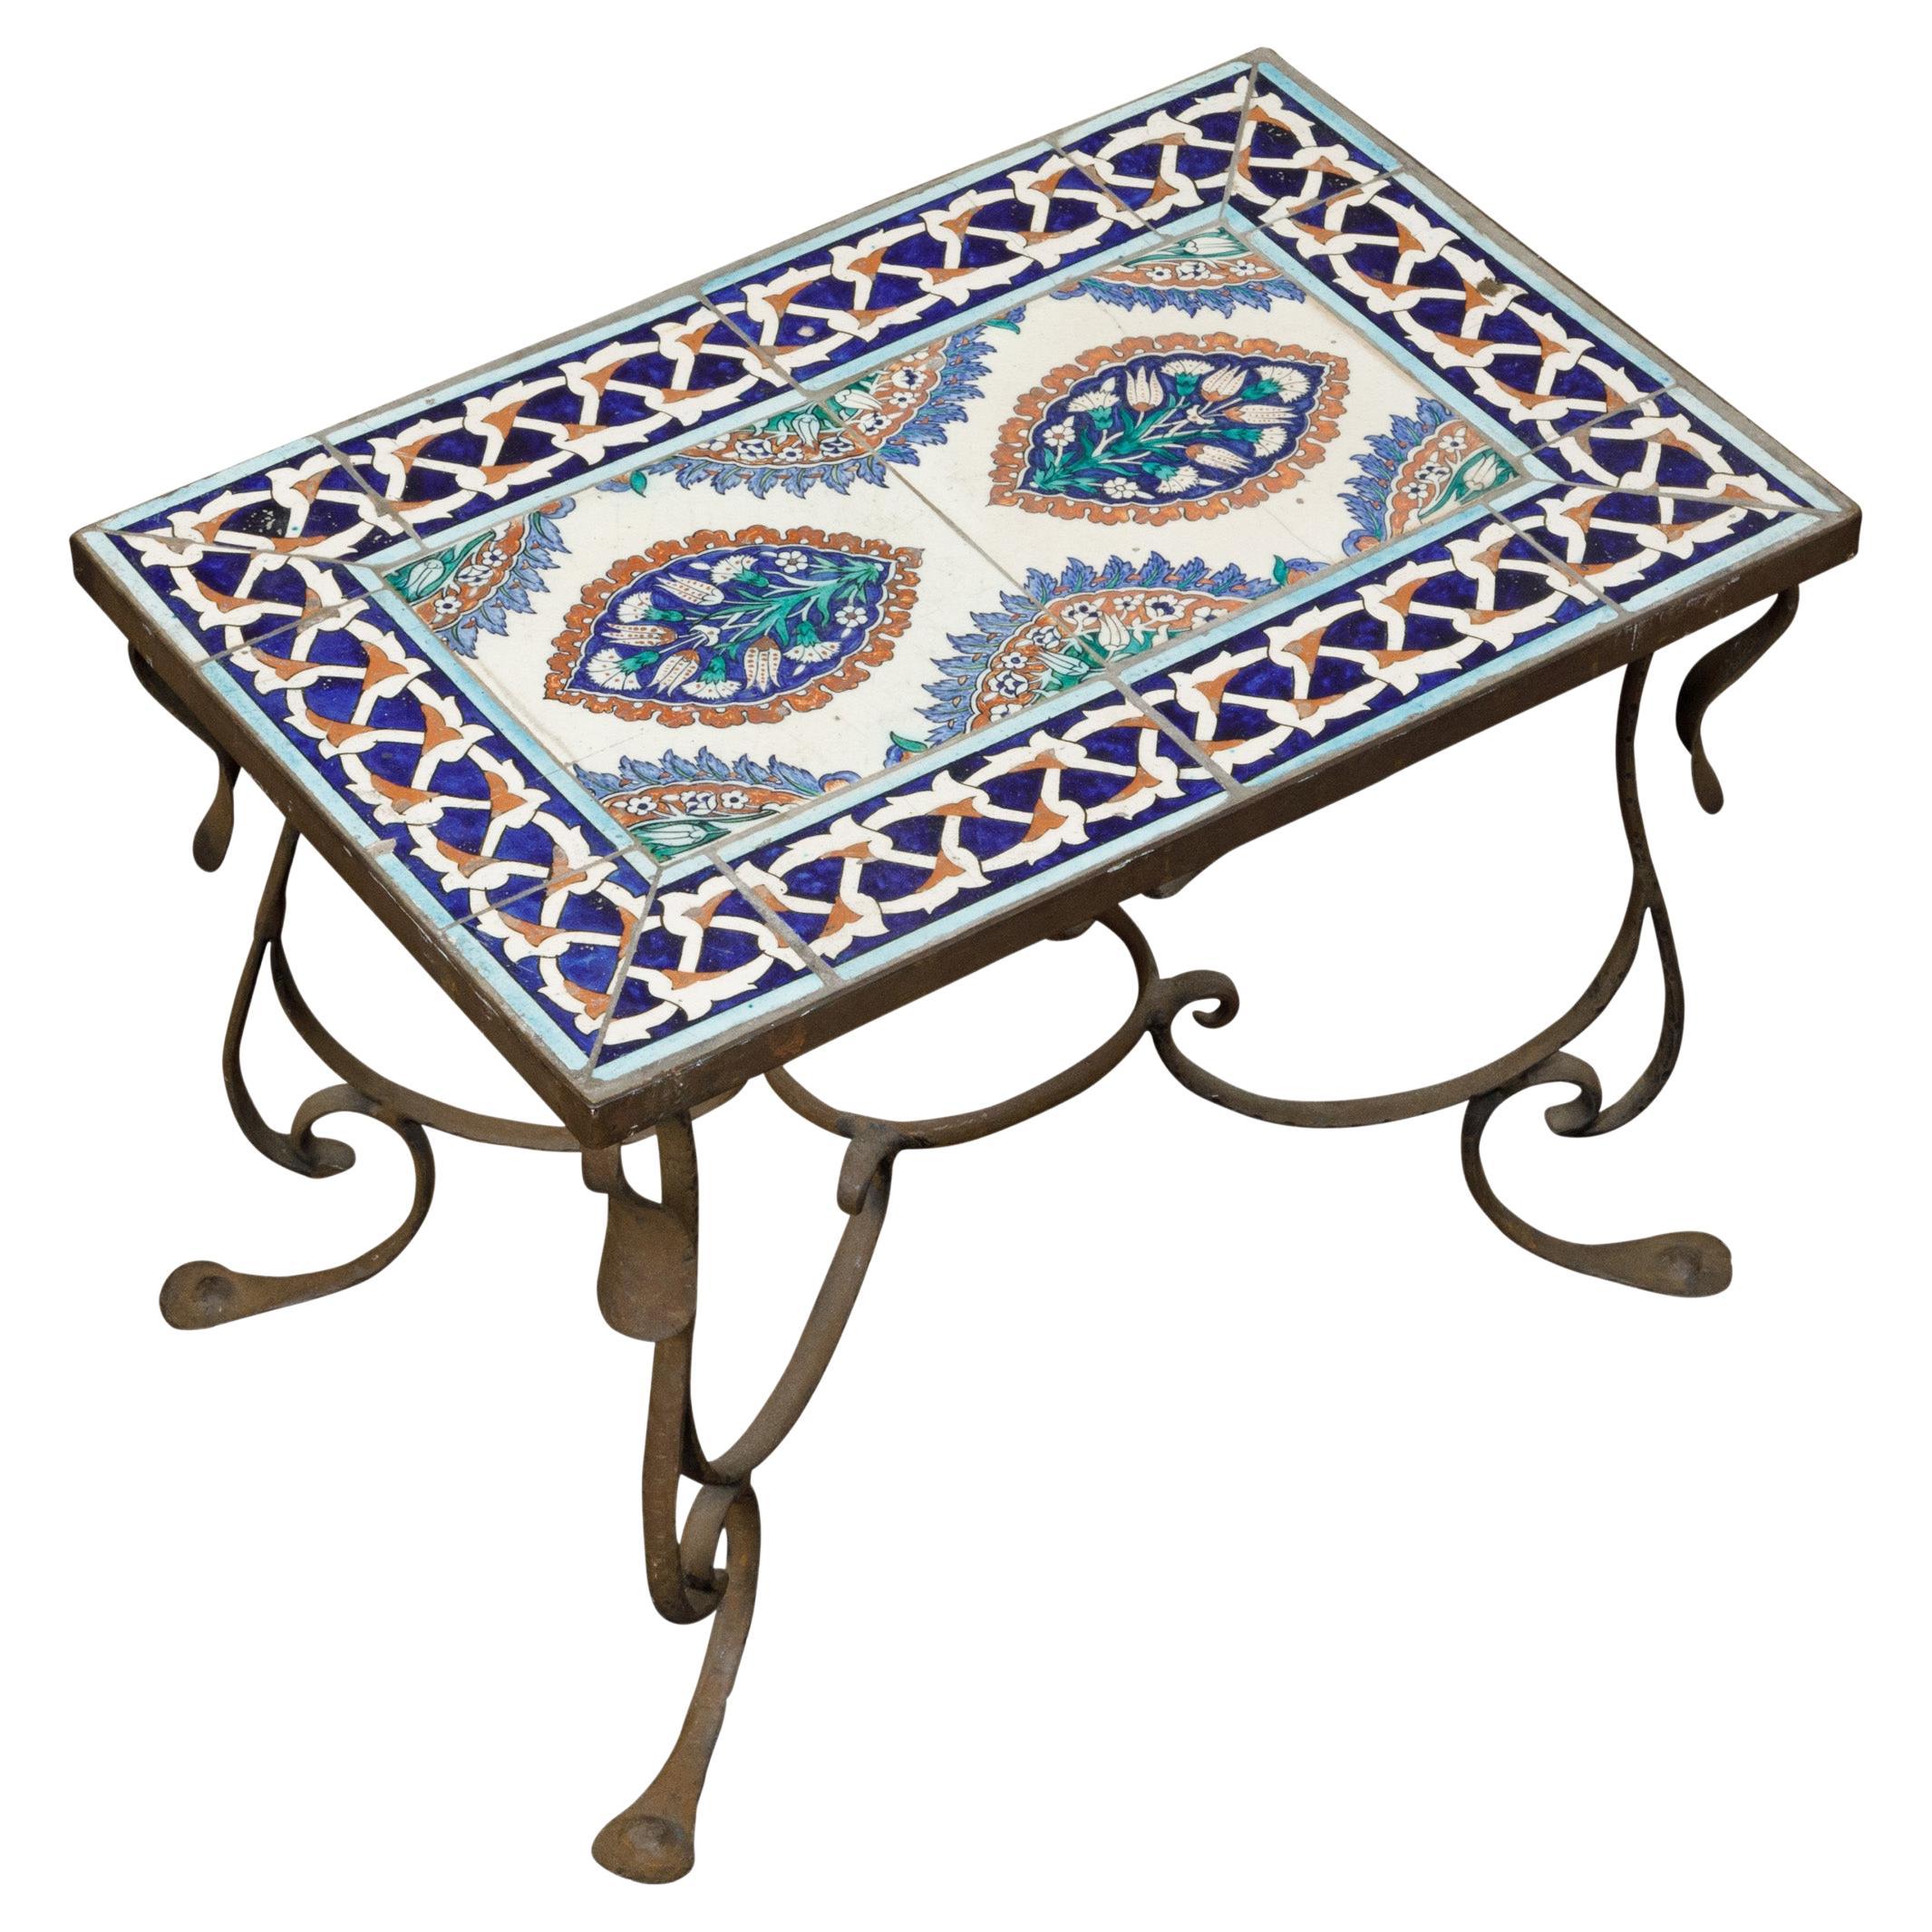 Midcentury Italian Wrought-Iron Coffee Table with Tile Top and Scrolling Base For Sale